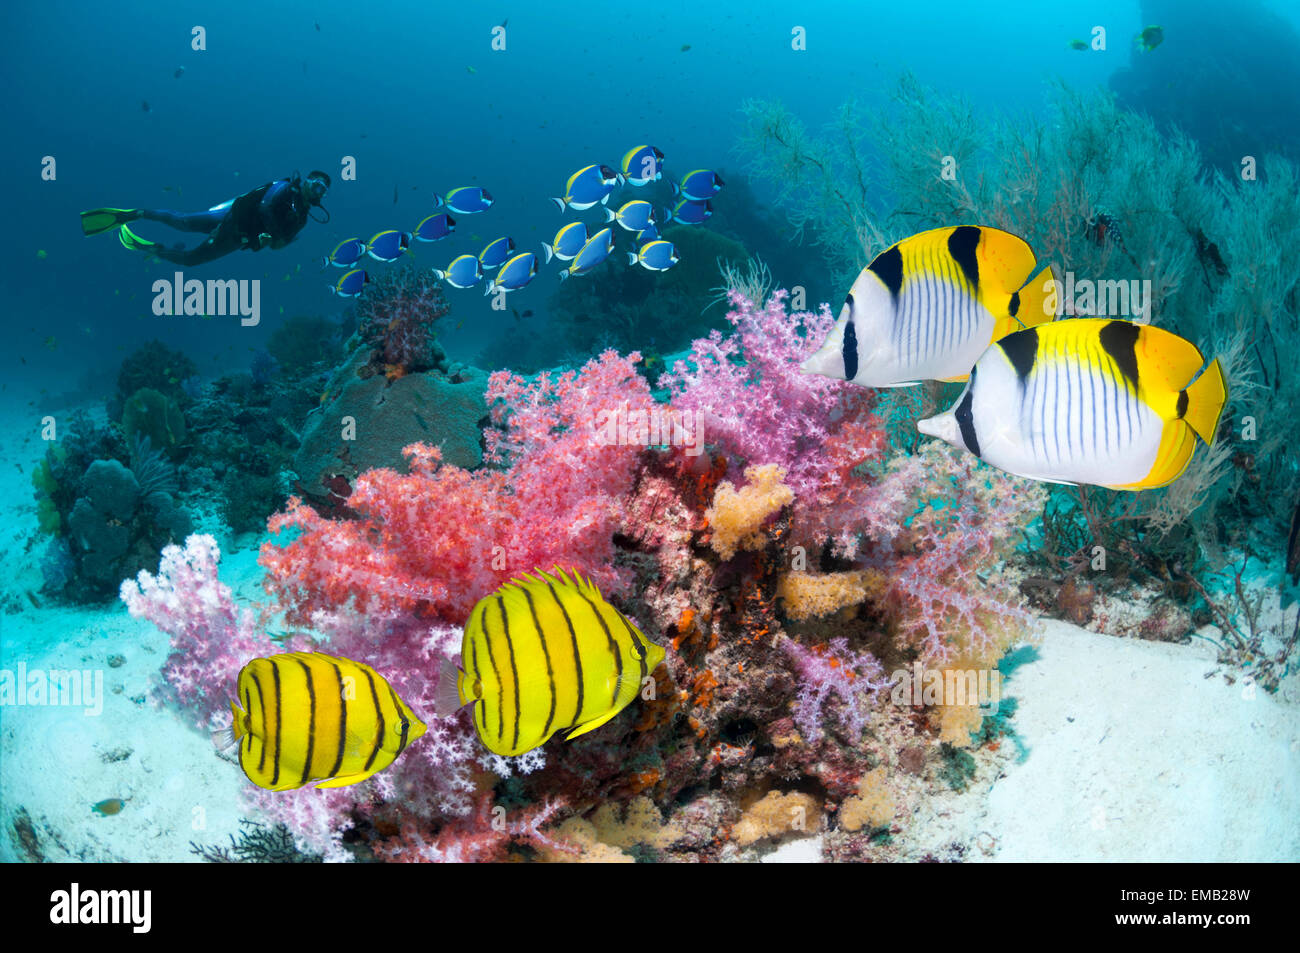 Coral reef scenery with Butterflyfish a school of Powderblue surgeonfish and a male scuba diver  Indonesia Stock Photo